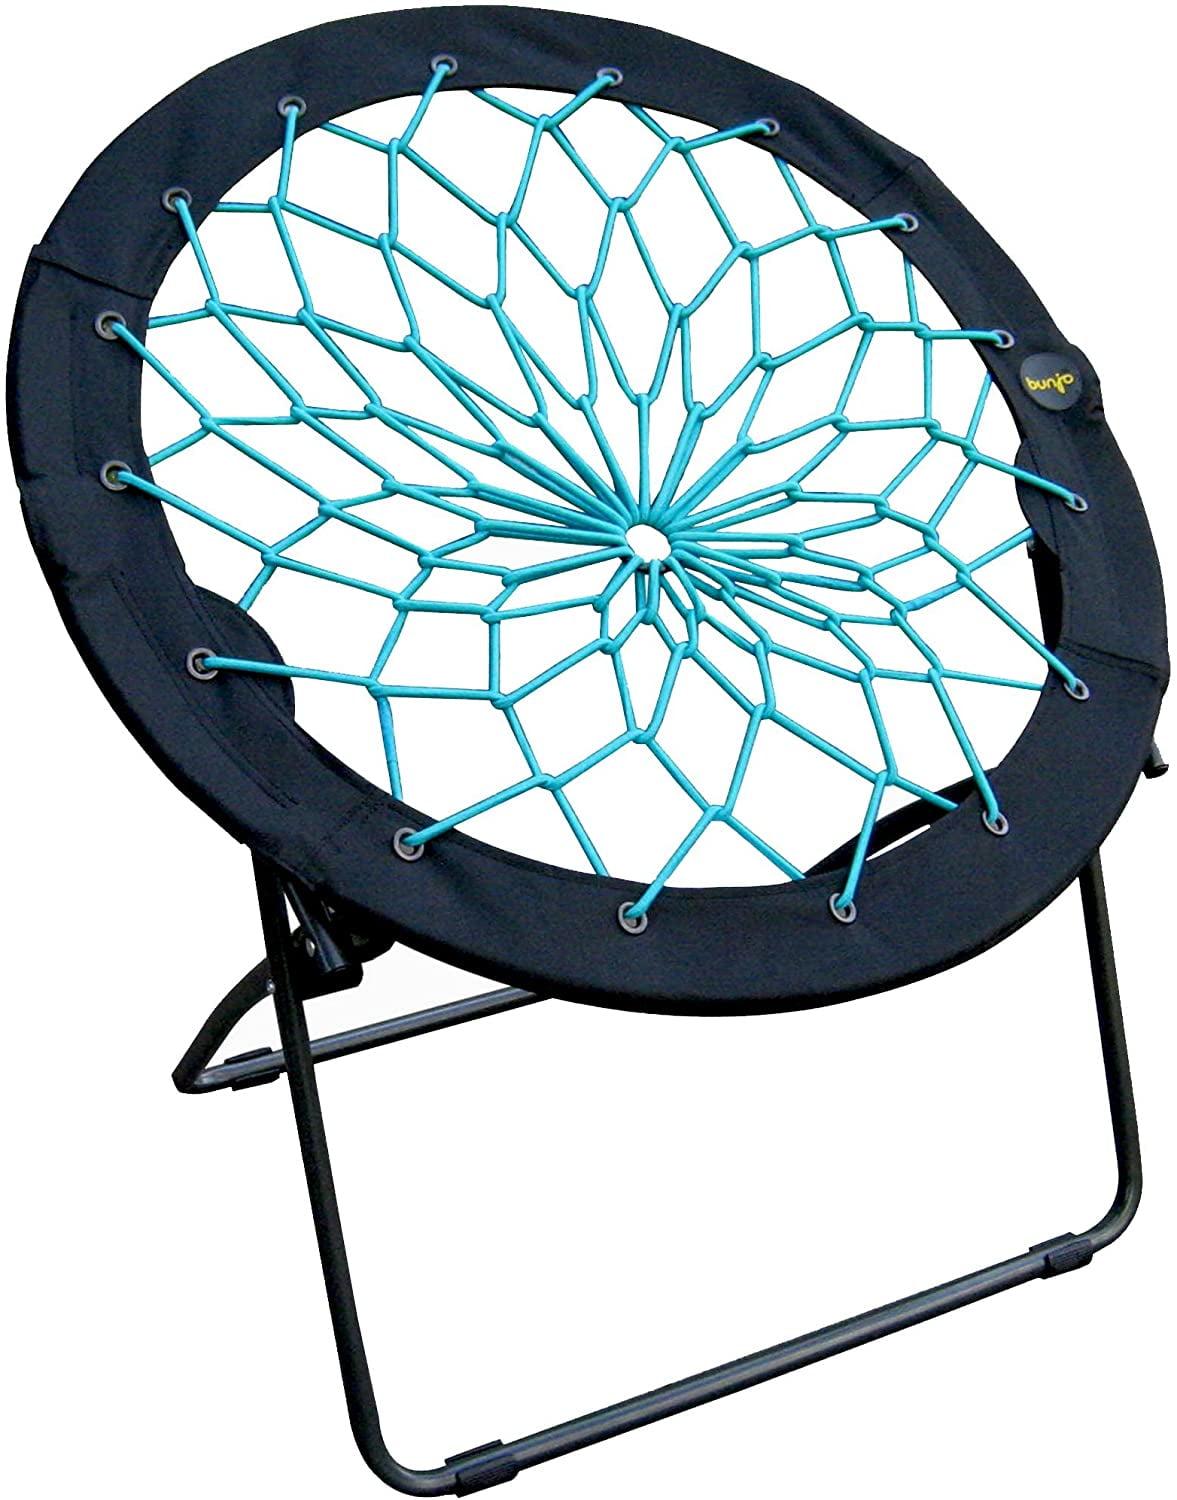 Zenithen Bungee Folding Bouncy Dish/Saucer Chair with Steel Frame